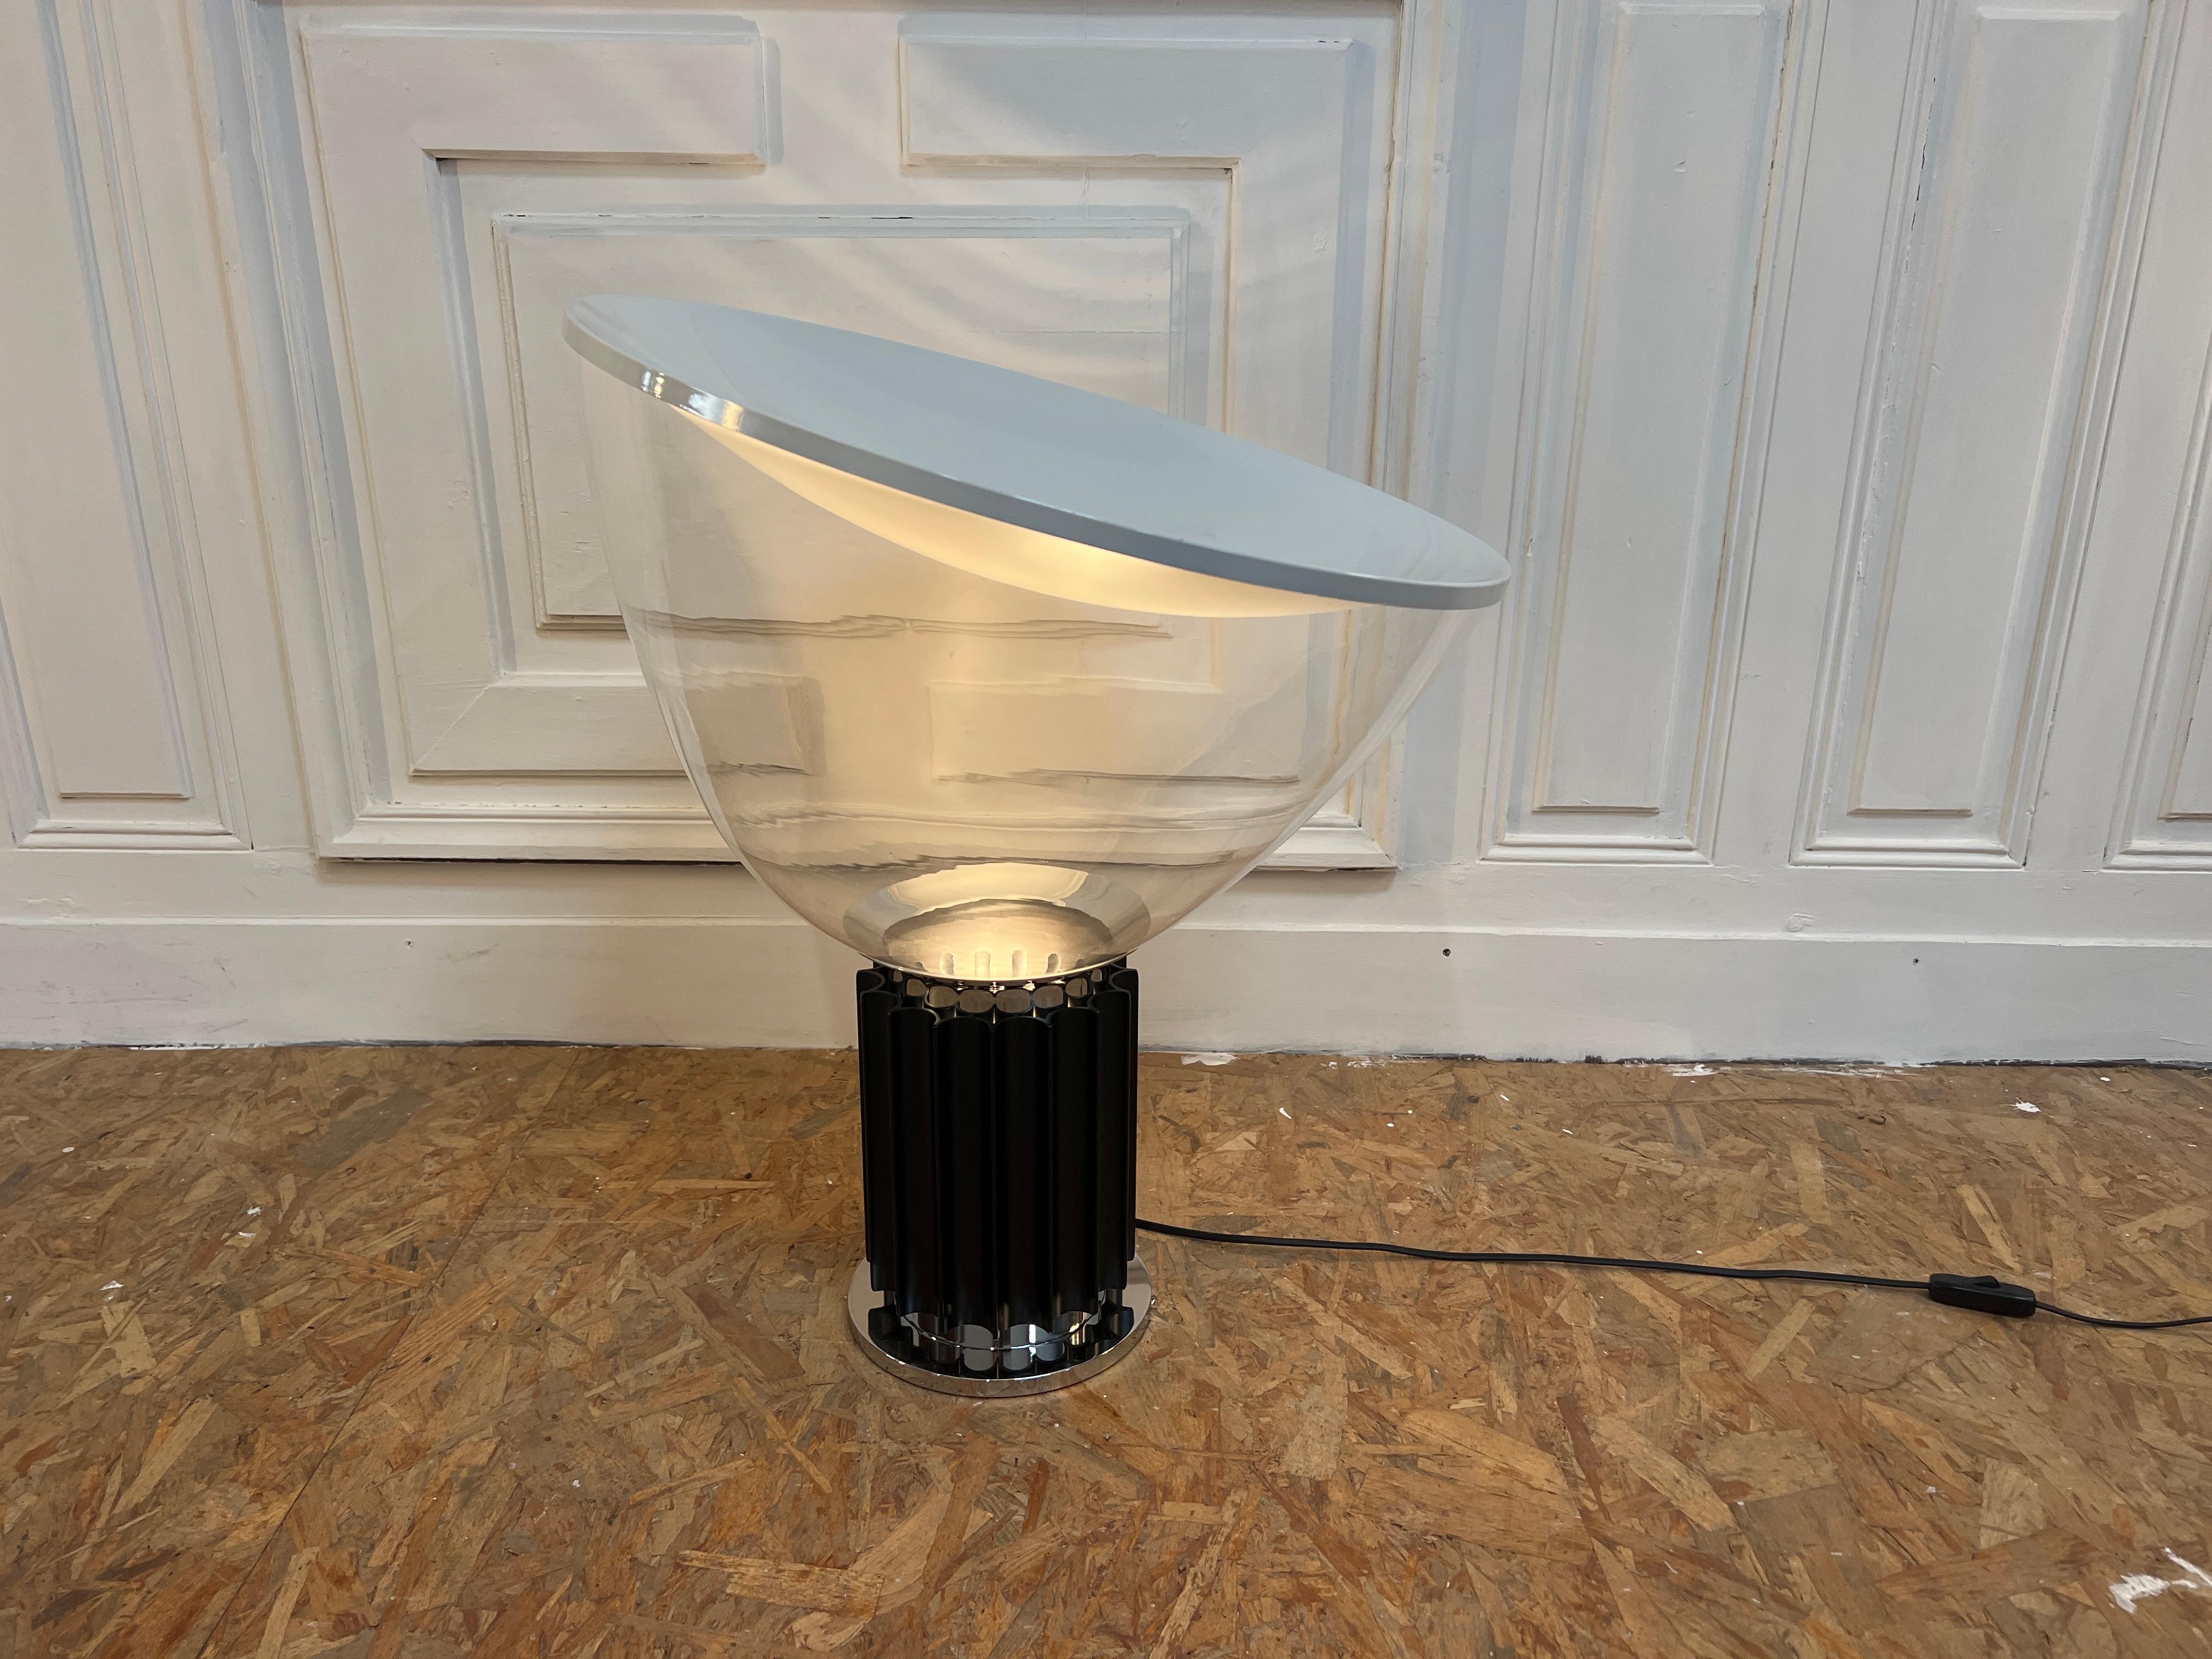 Wonderfull lamp table, Taccia model by Flos edition 1990s 
With a Murano’ glass in 50 cm (diameter)

The Taccia lamp was designed by Italian designers Achille and Pier Giacomo Castiglioni in 1962. It combines very refined materials, such as the